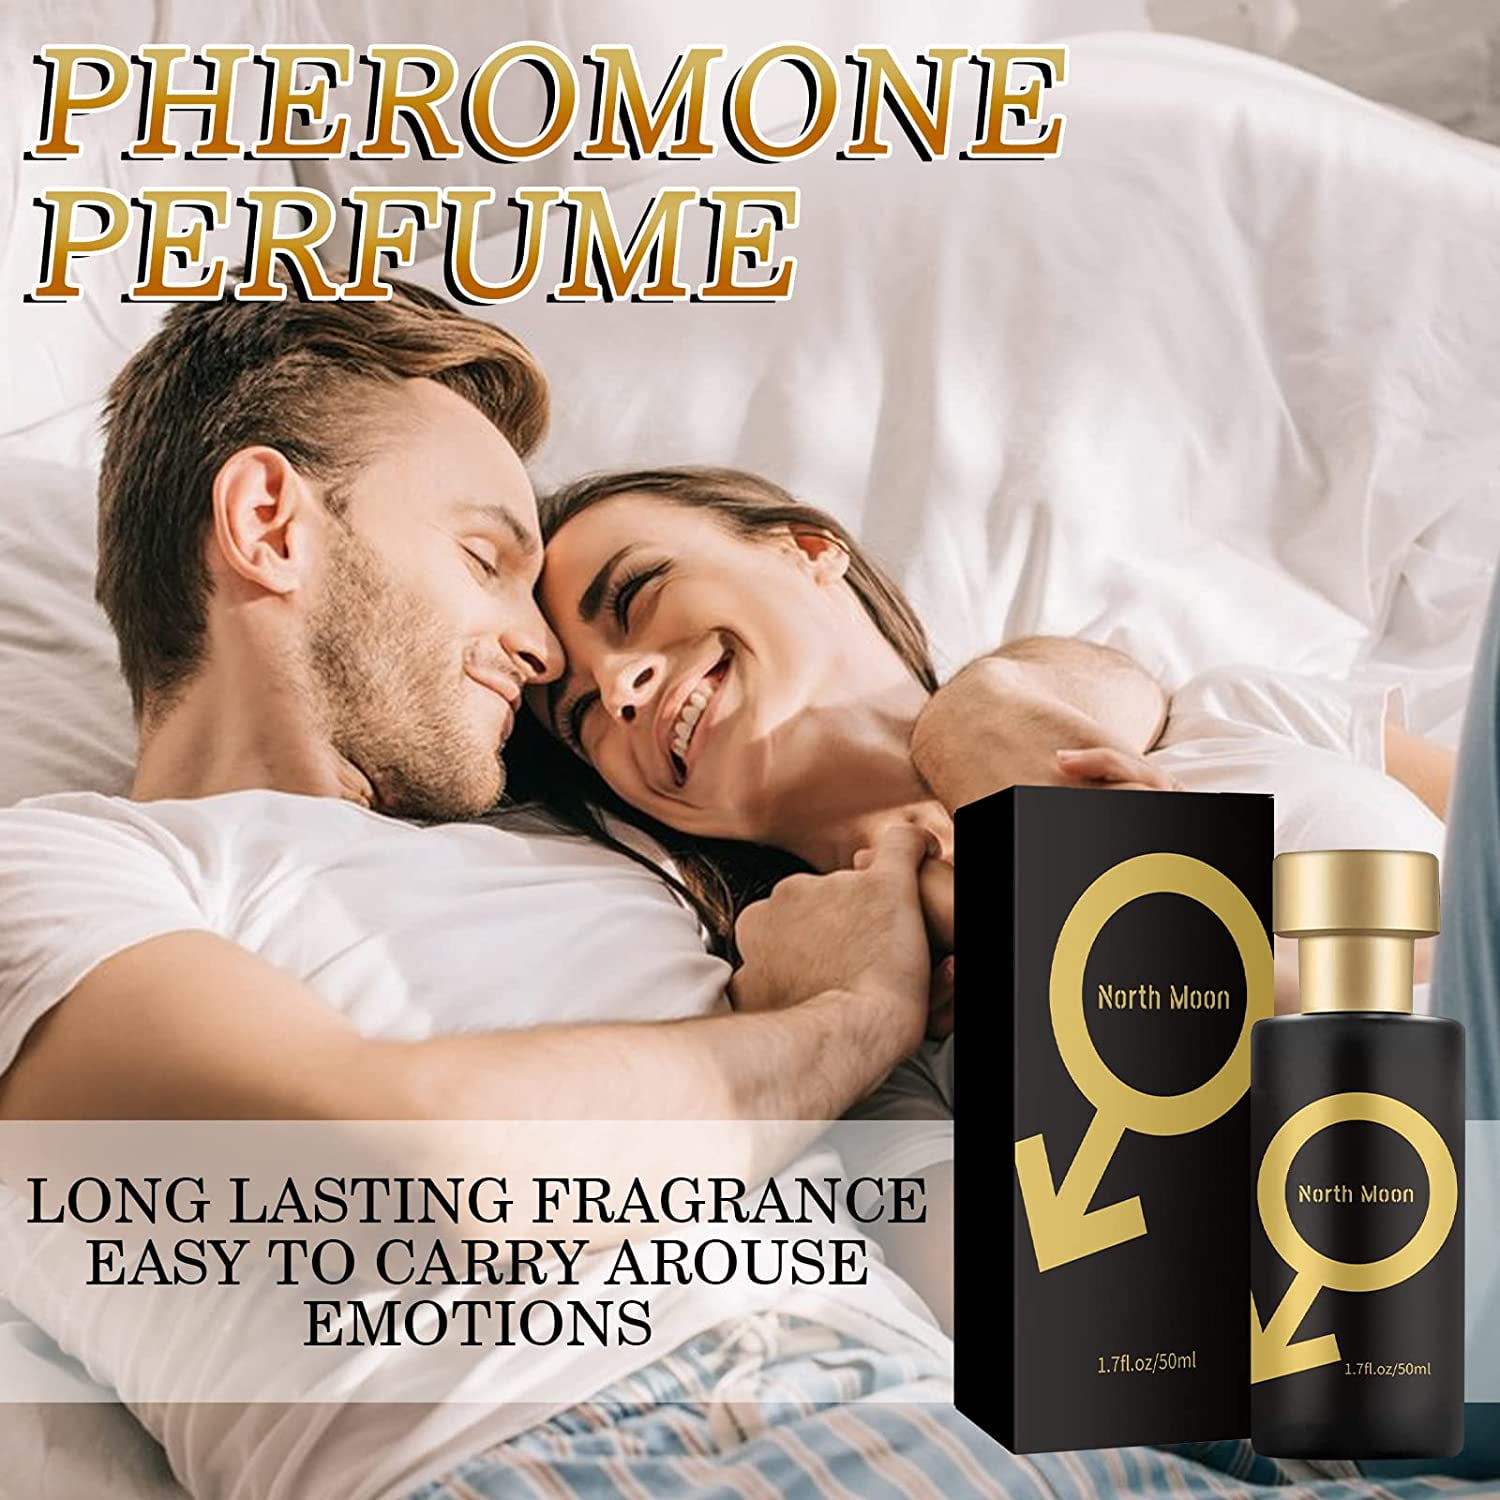 Golden Lure Pheromone Perfume, Golden Lure Perfume, Romantic Pheromone  Glitter Perfume, Lure Her Perfume for Men Cologne, Pheromone Oil Perfume  Spray for Women to Attract Men (Black) : : Health & Personal Care